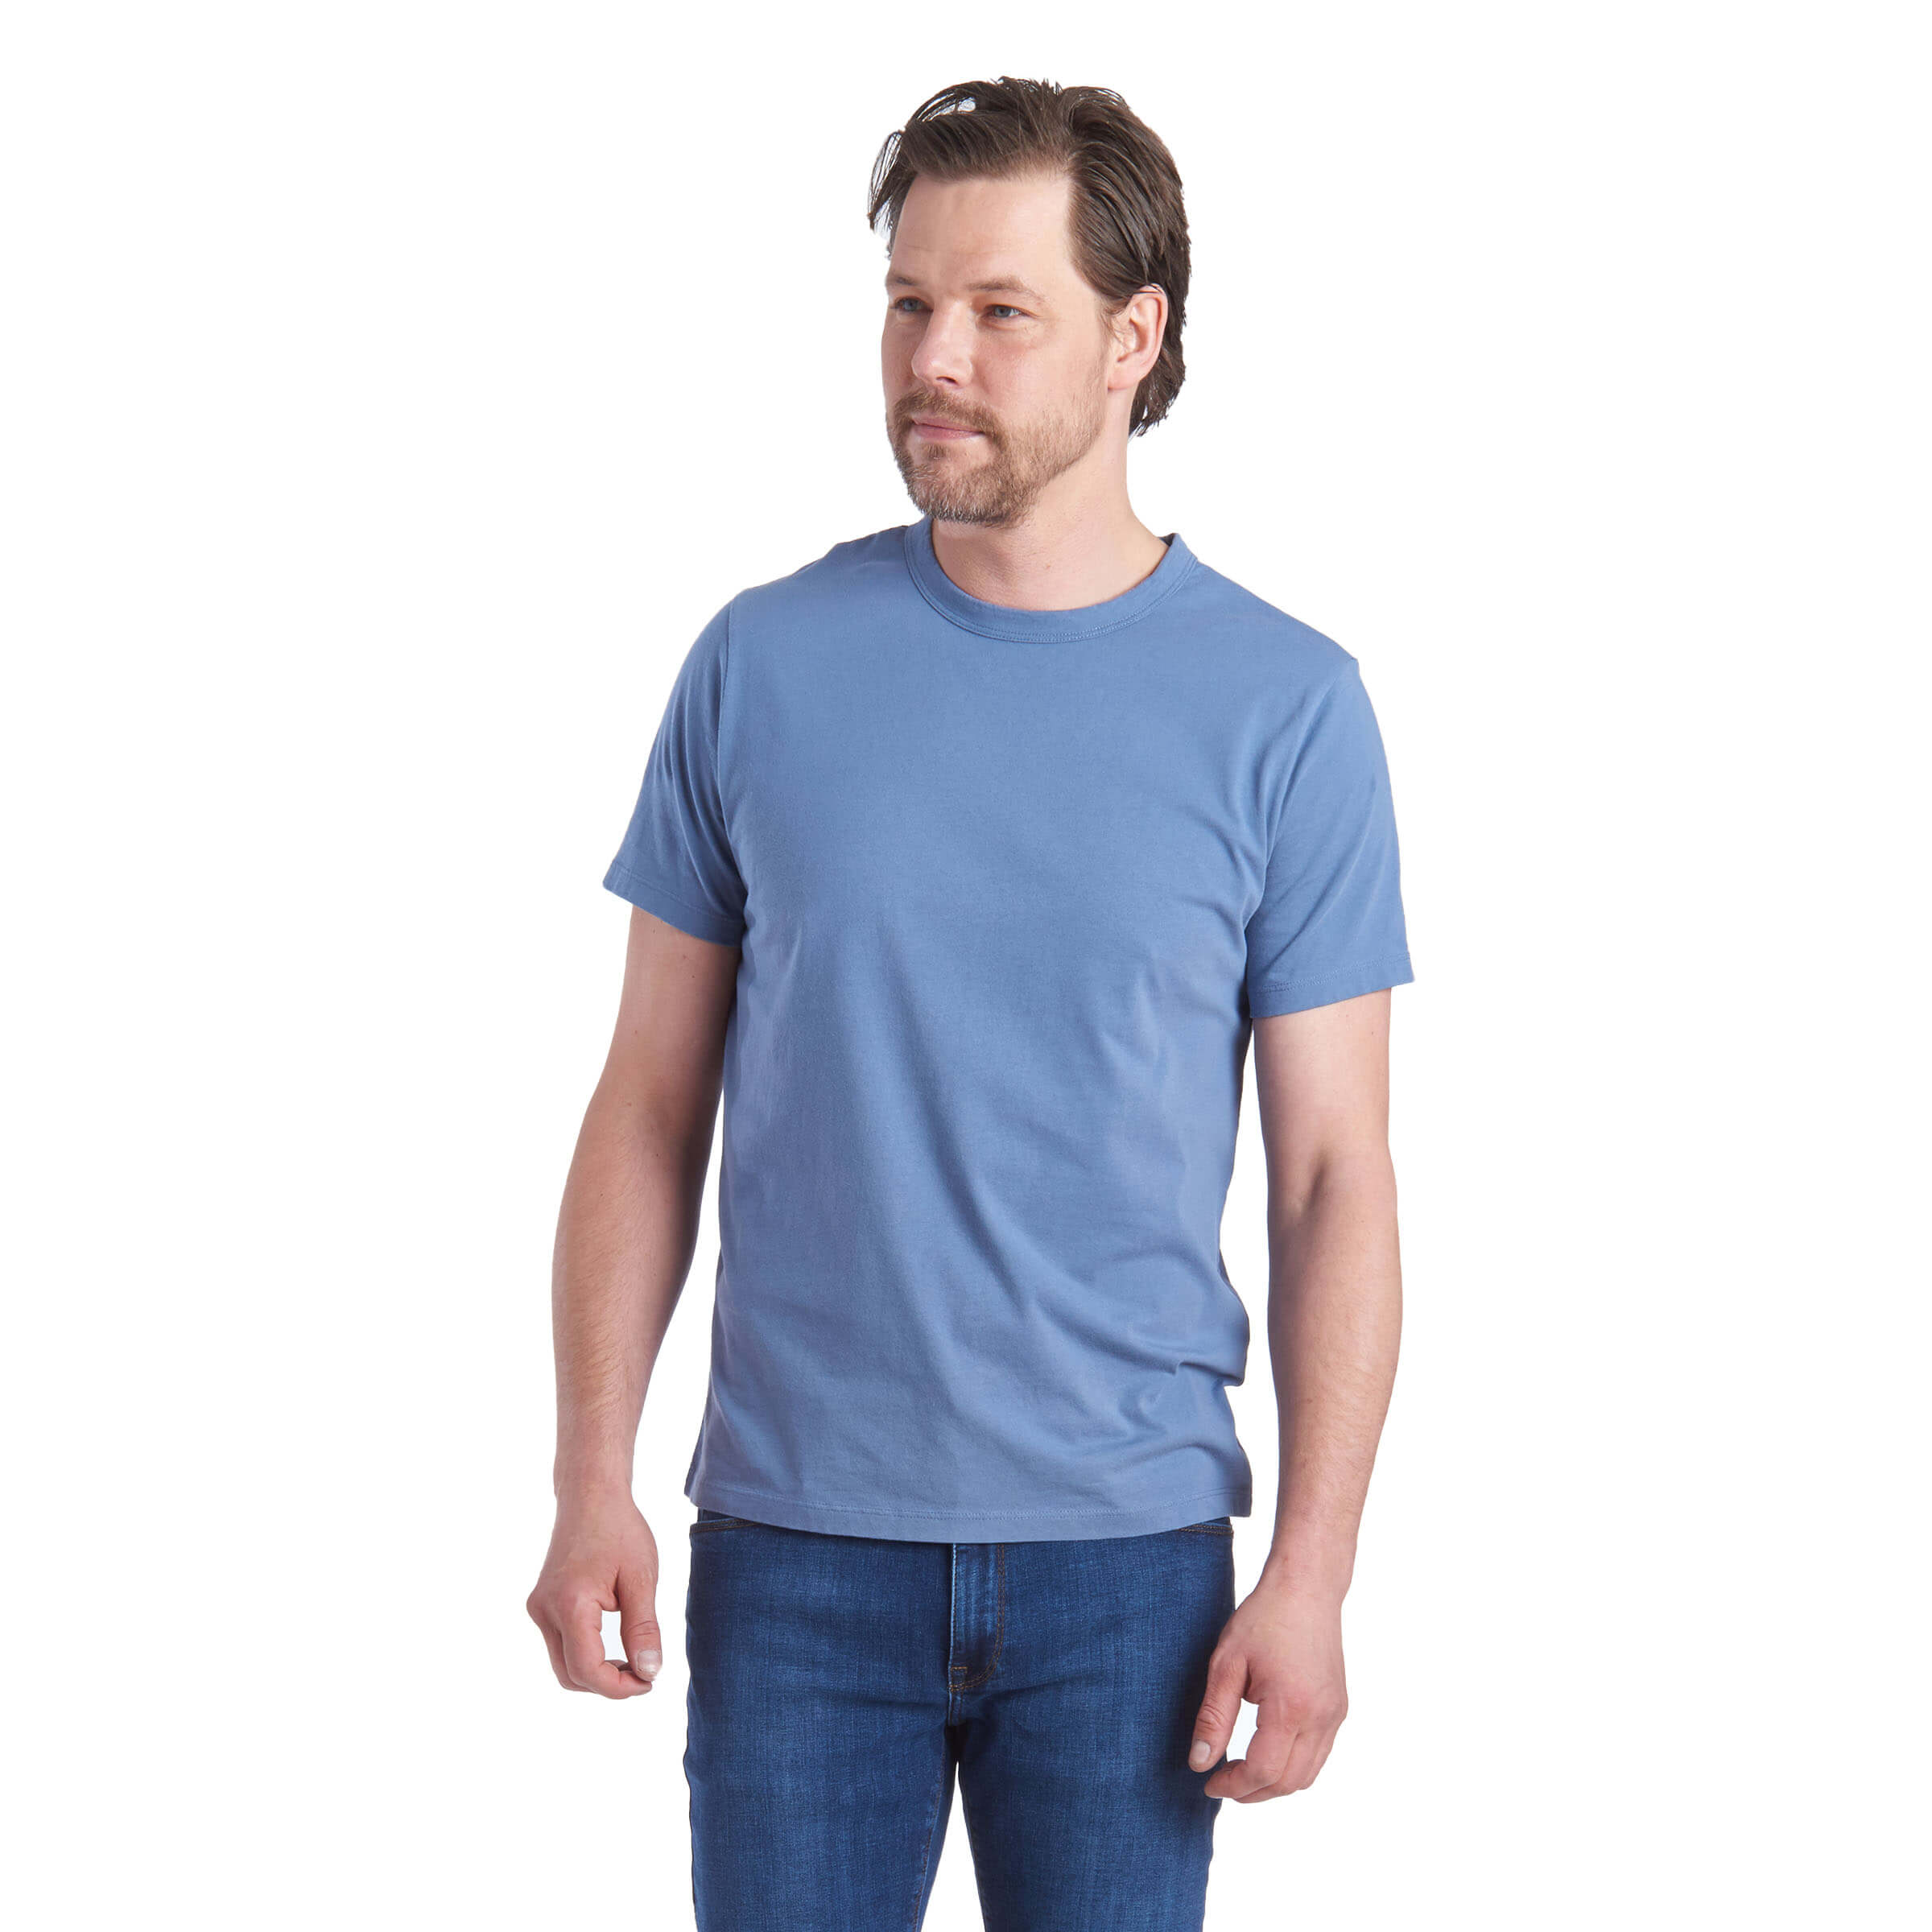 Men wearing Washed Blue Classic Crew Driggs Tee